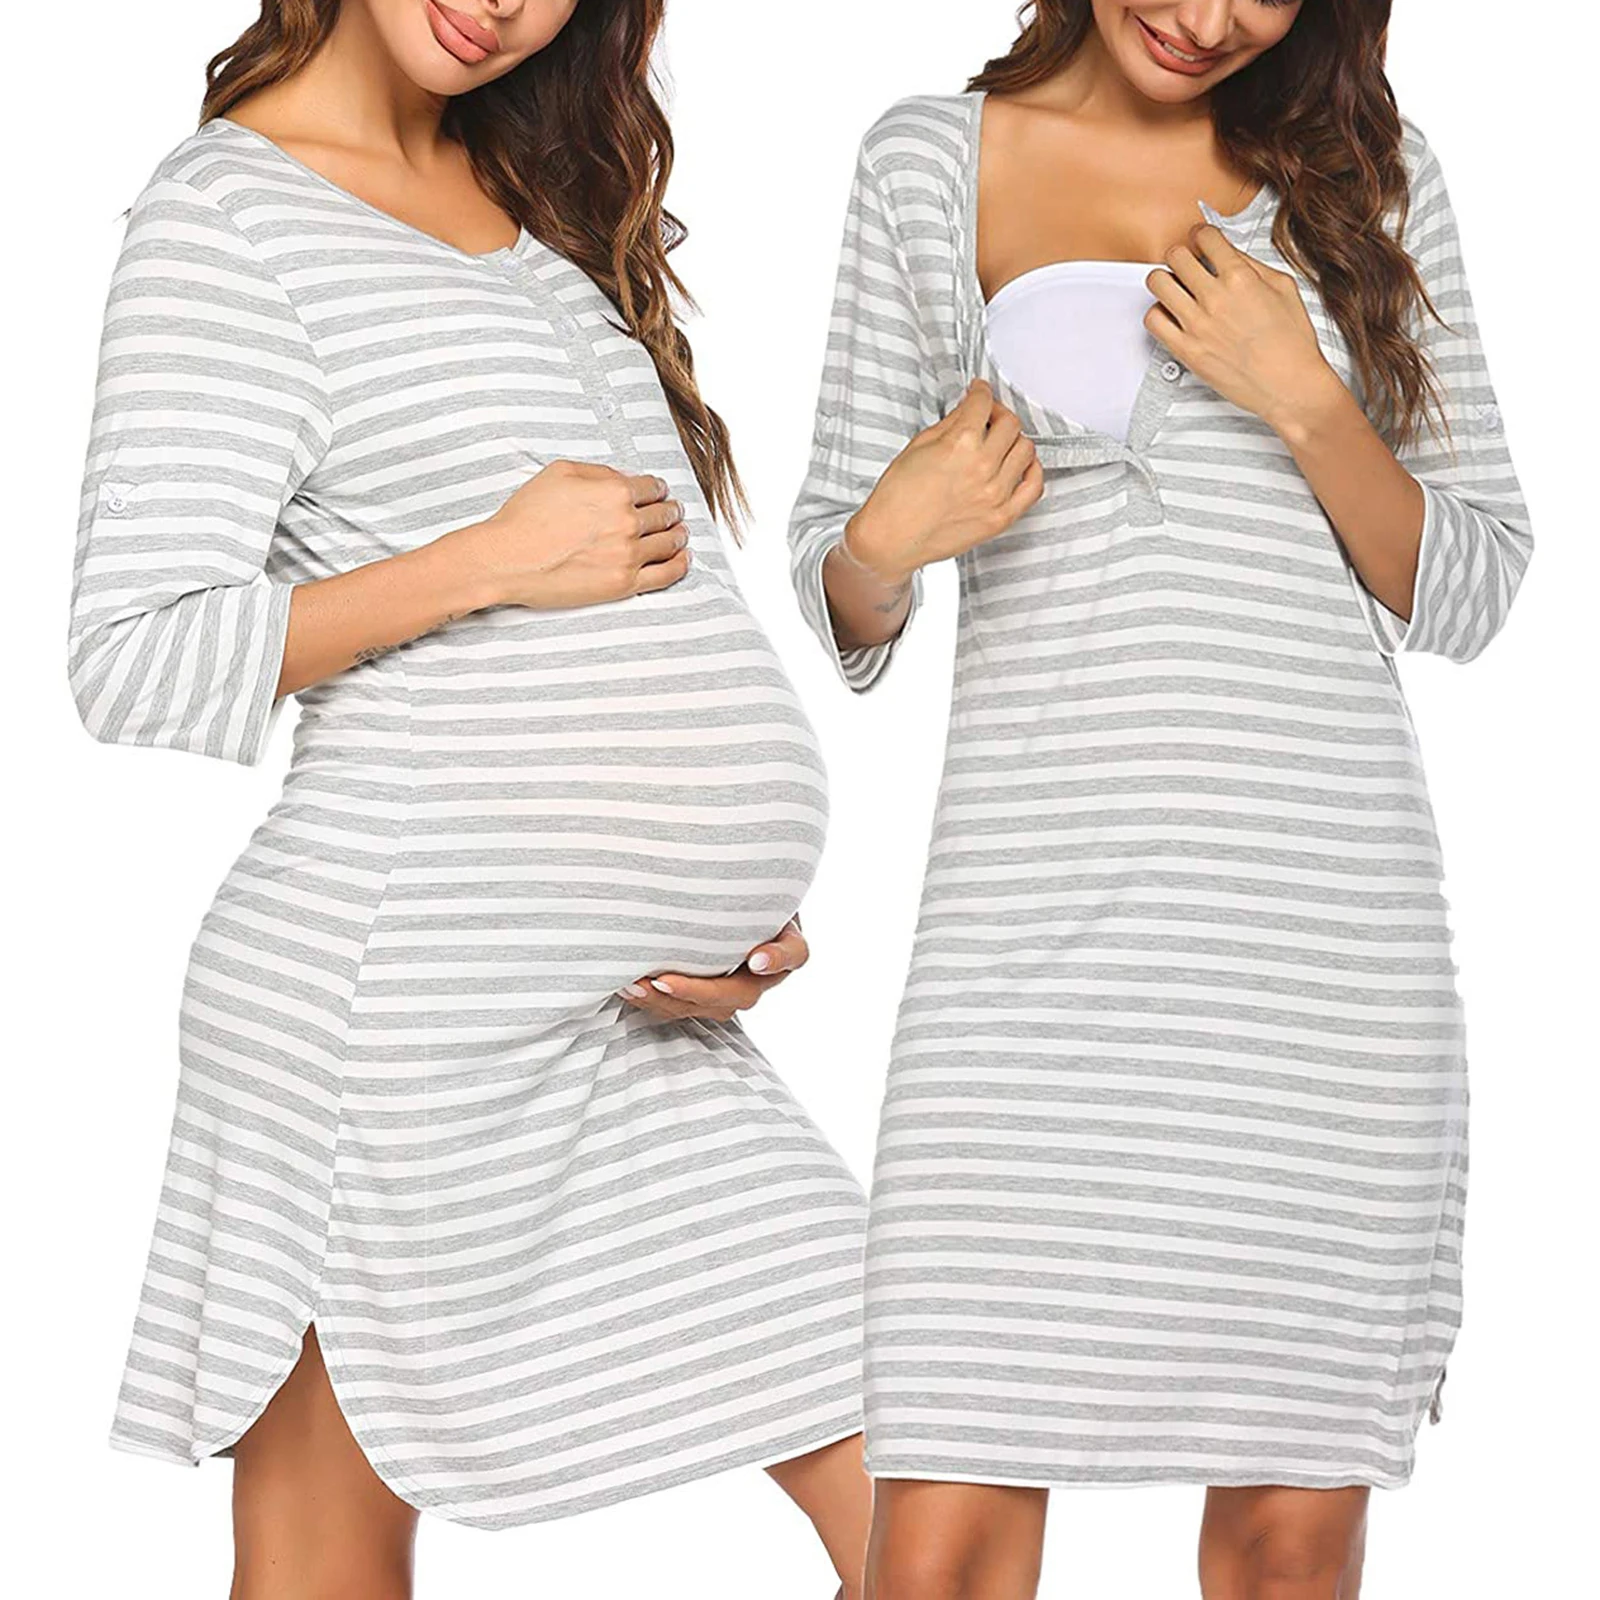 

Pregnant Women Casual Clothing Mid Sleeve Round Neckline Button Closure Front Striped Style Dress for Nursing and Breastfeeding